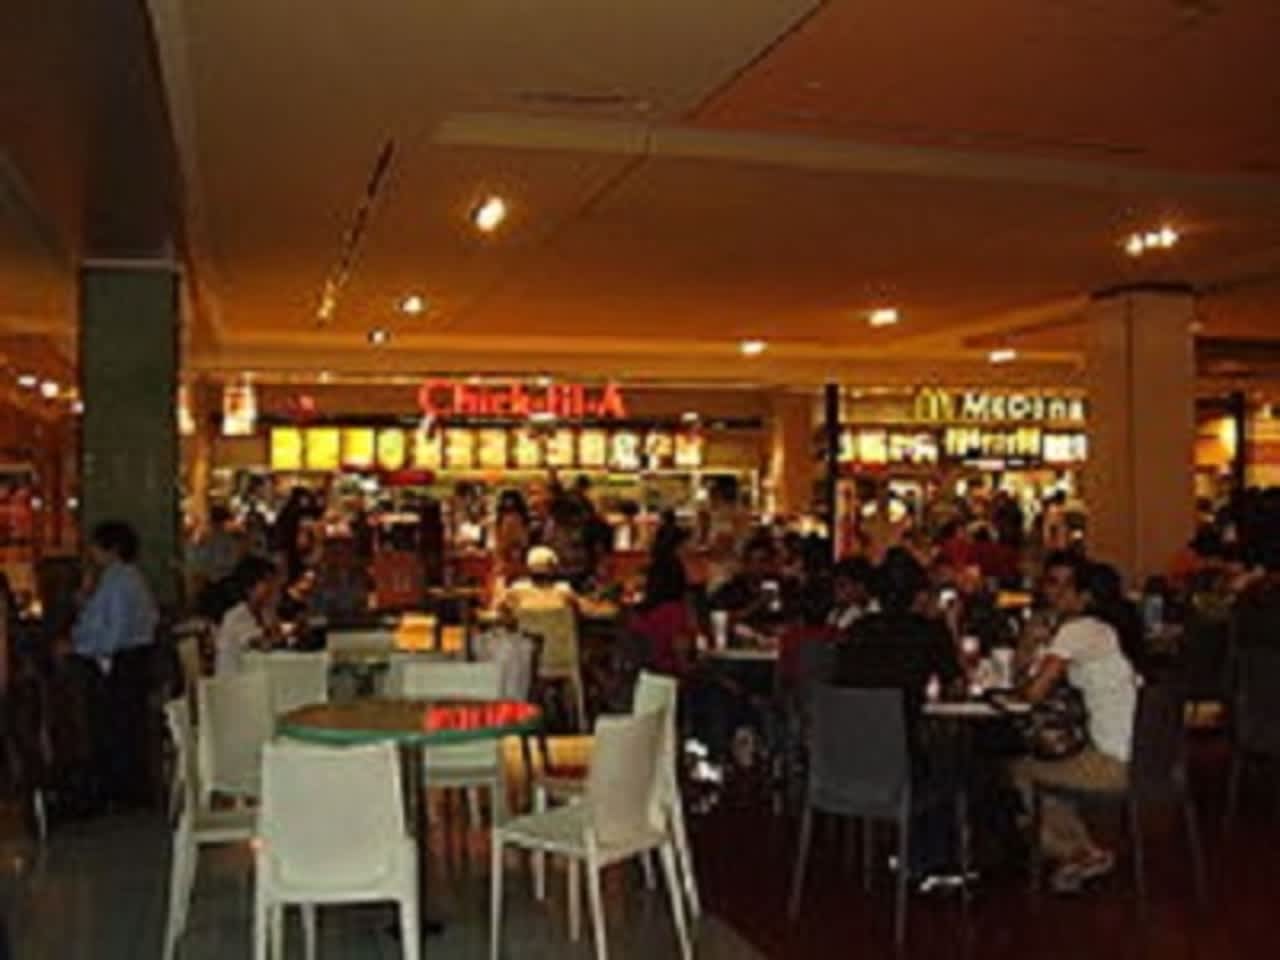 Chick-fil-A, a fast-service chicken chain, is planning to build a two-story restaurant in Norwalk, Conn. Here patrons dine in a Chick-fil-A in a mall's food court in Houston, Texas.